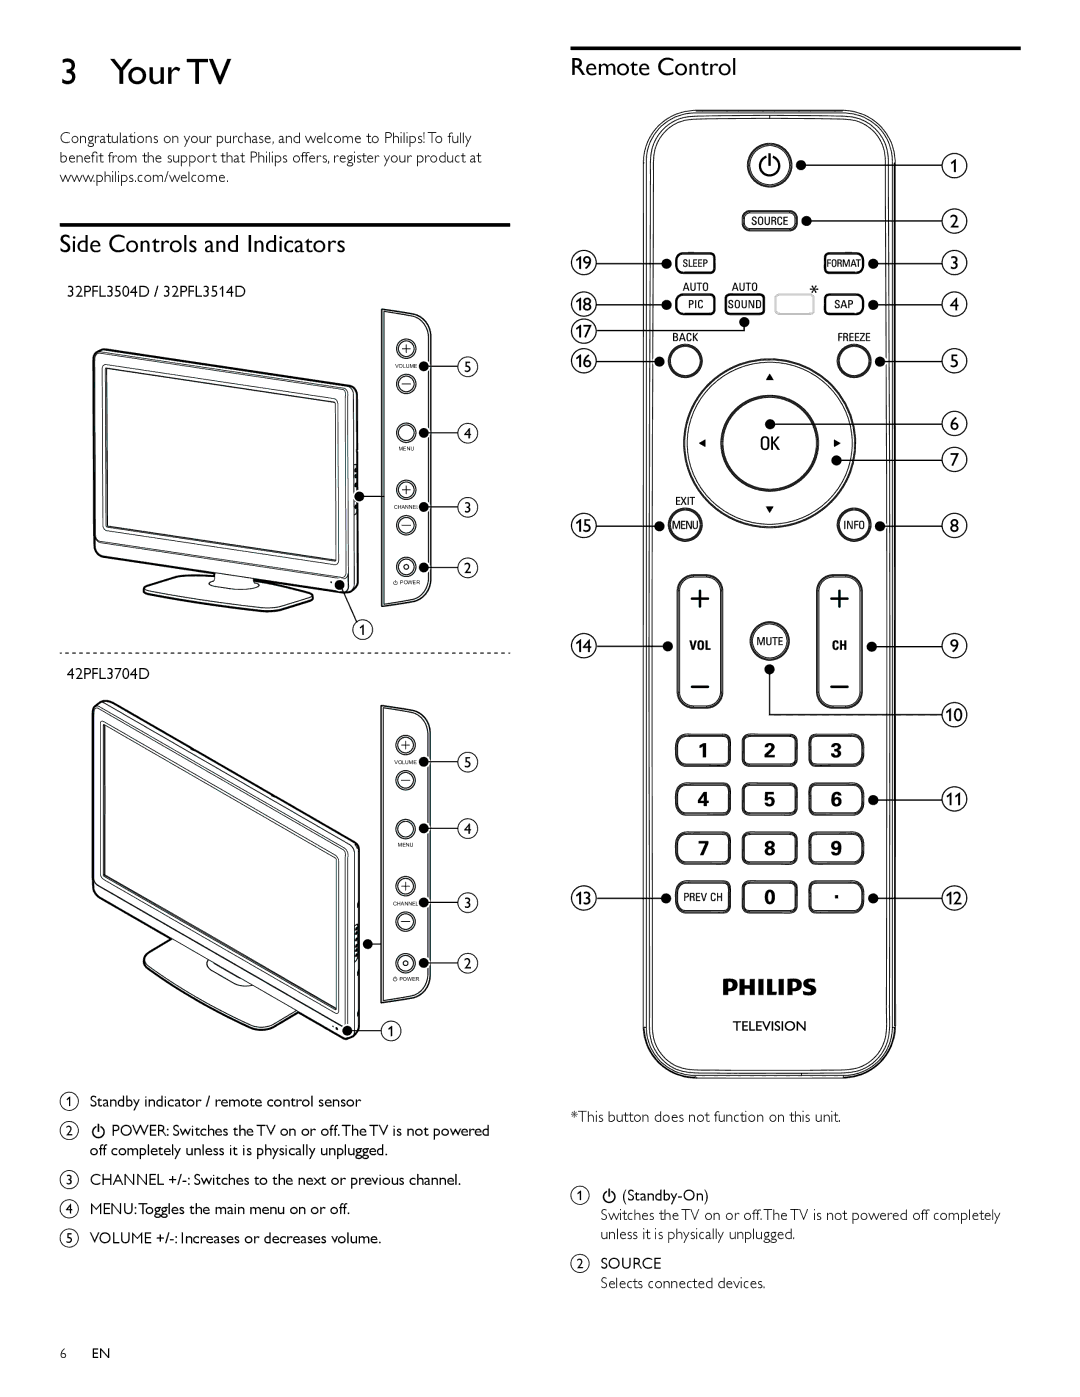 Philips 32PFL3504D, 42PFL3704D, 32PFL3514D user manual Your TV, Side Controls and Indicators, Remote Control 